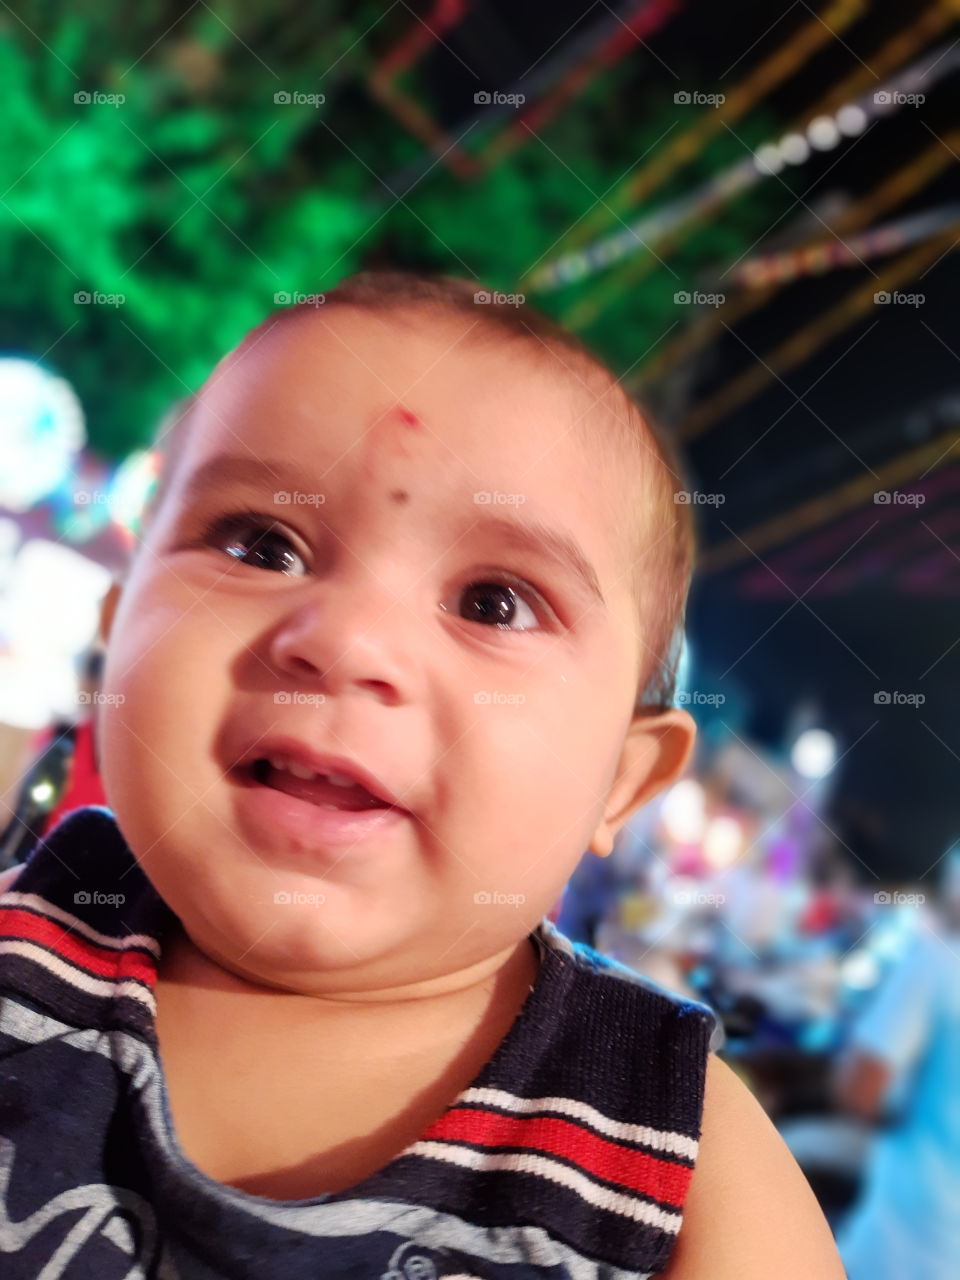 Indian baby give smile.